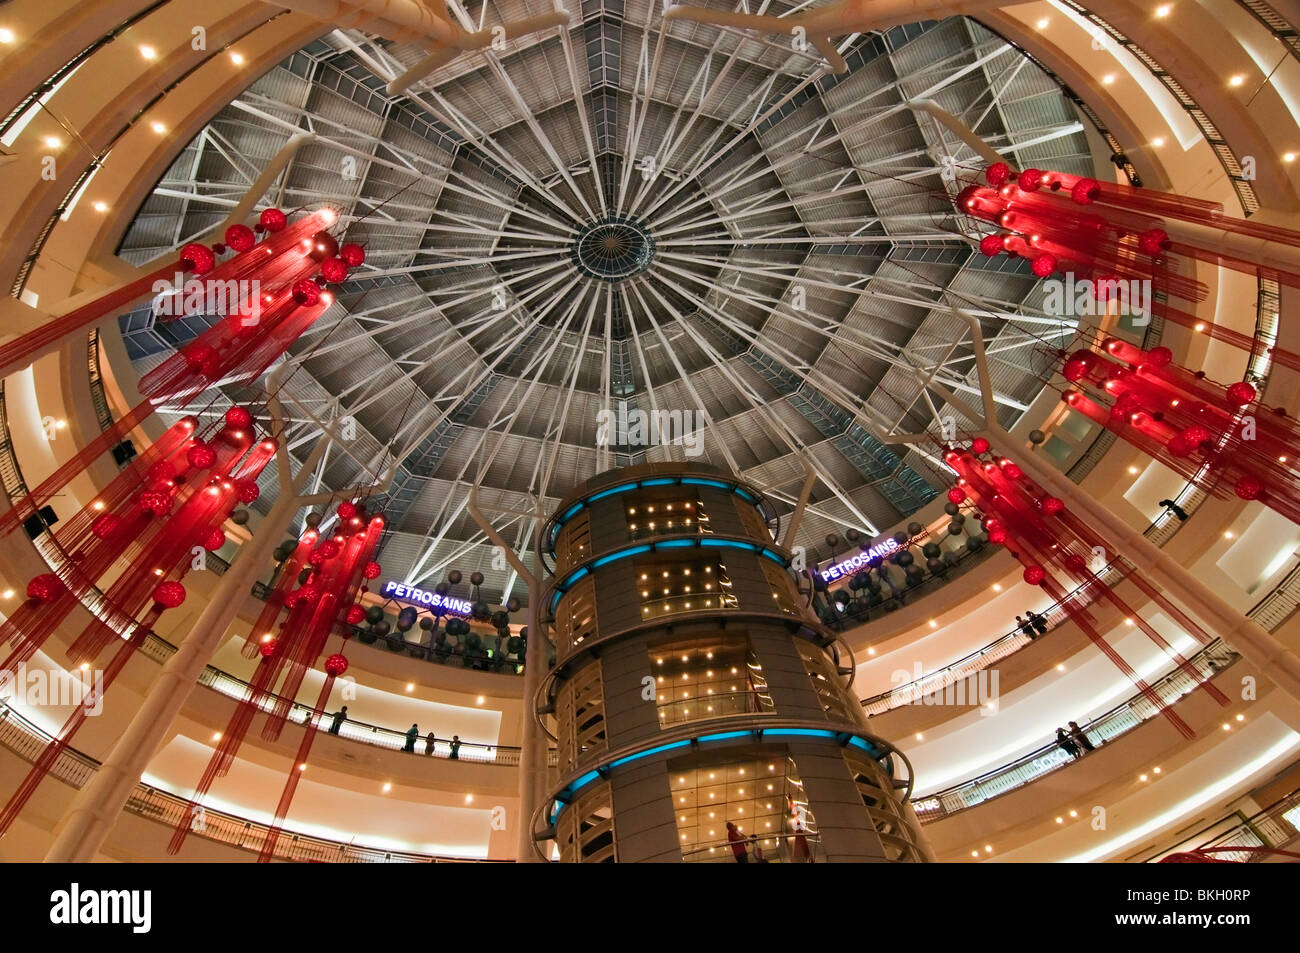 Domed ceiling at KLCC Suria shopping centre in Kuala Lumpur. Stock Photo